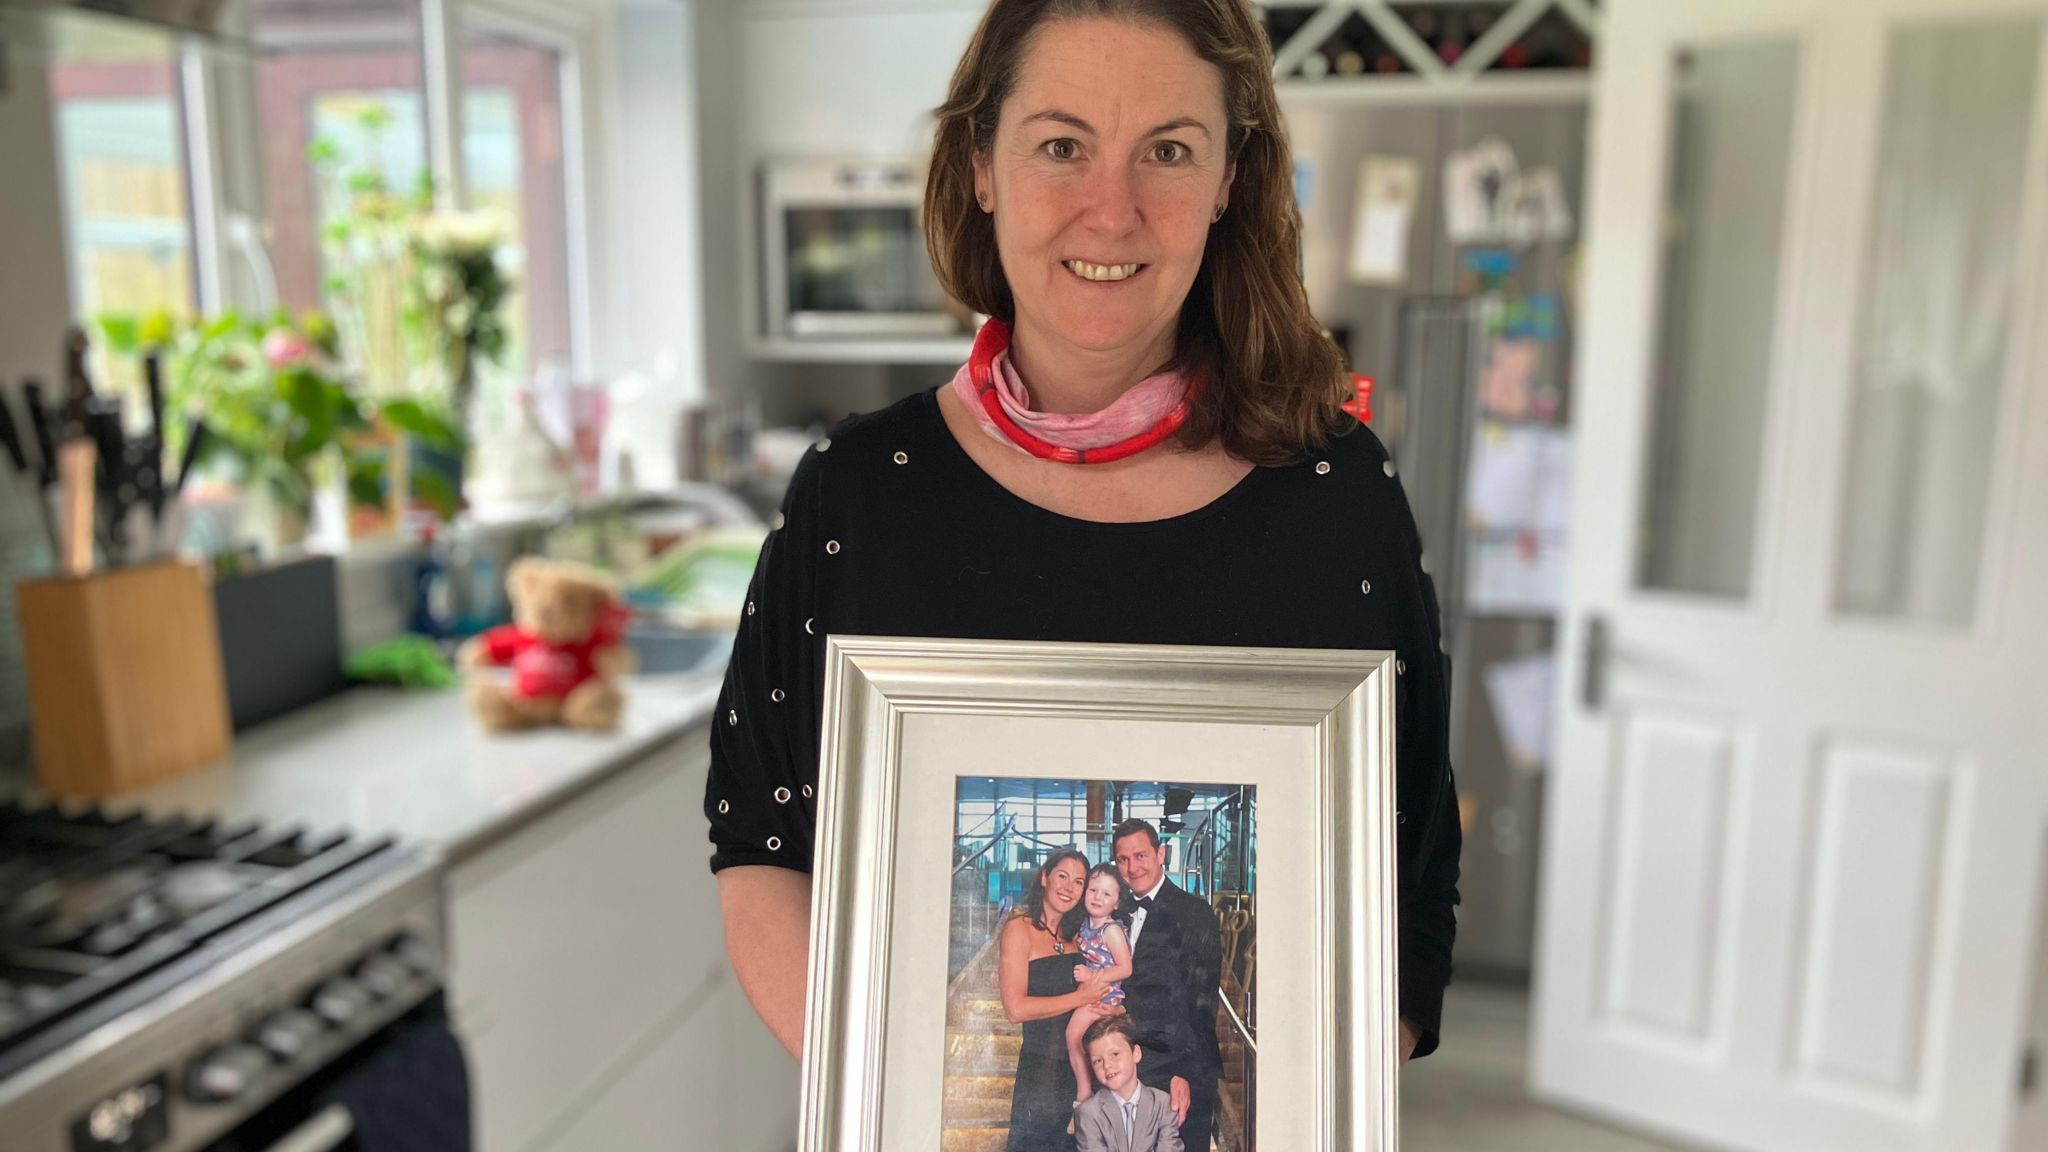 Anna with a photograph of her family